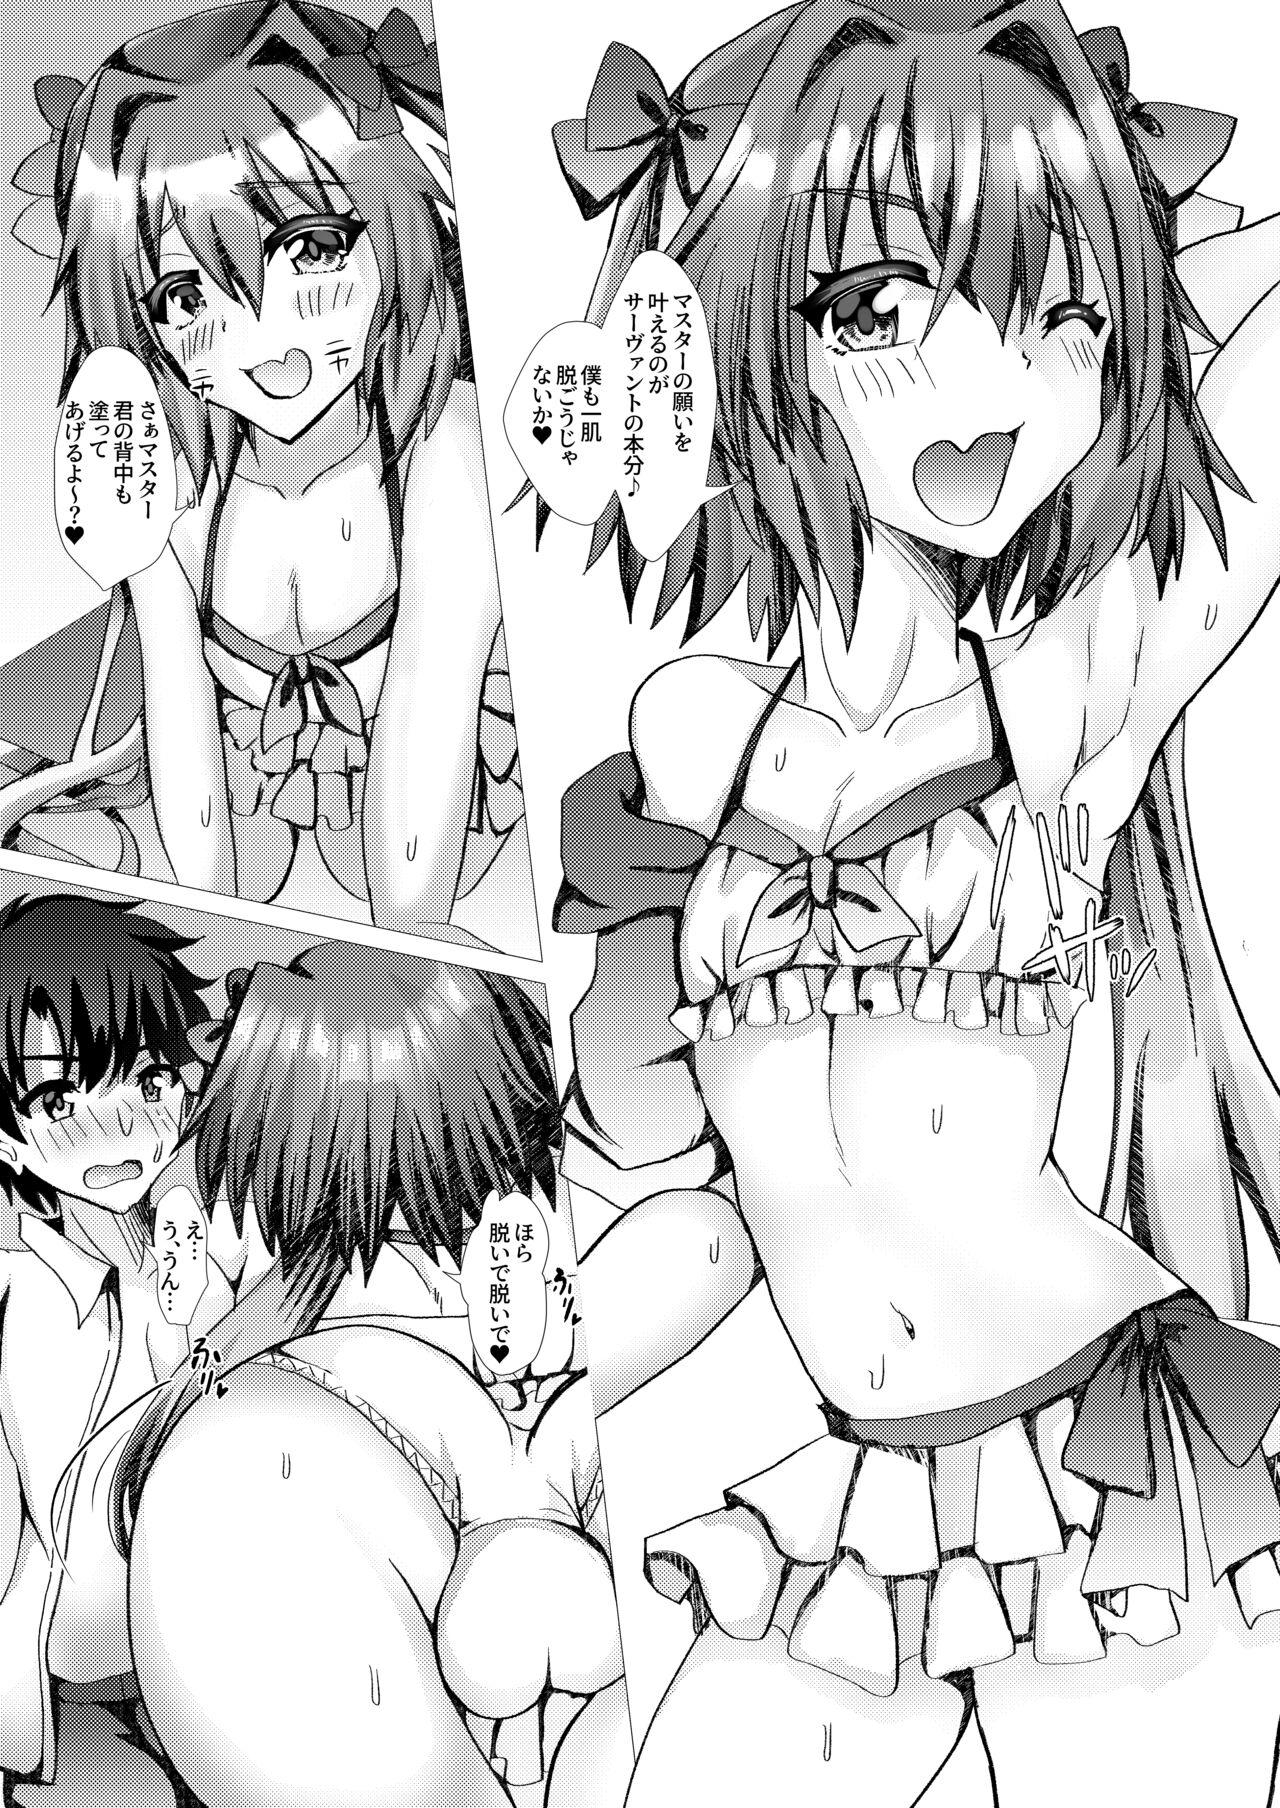 Sex Party Astolfo to Summer Vacation + Omake - Fate grand order Caught - Page 4